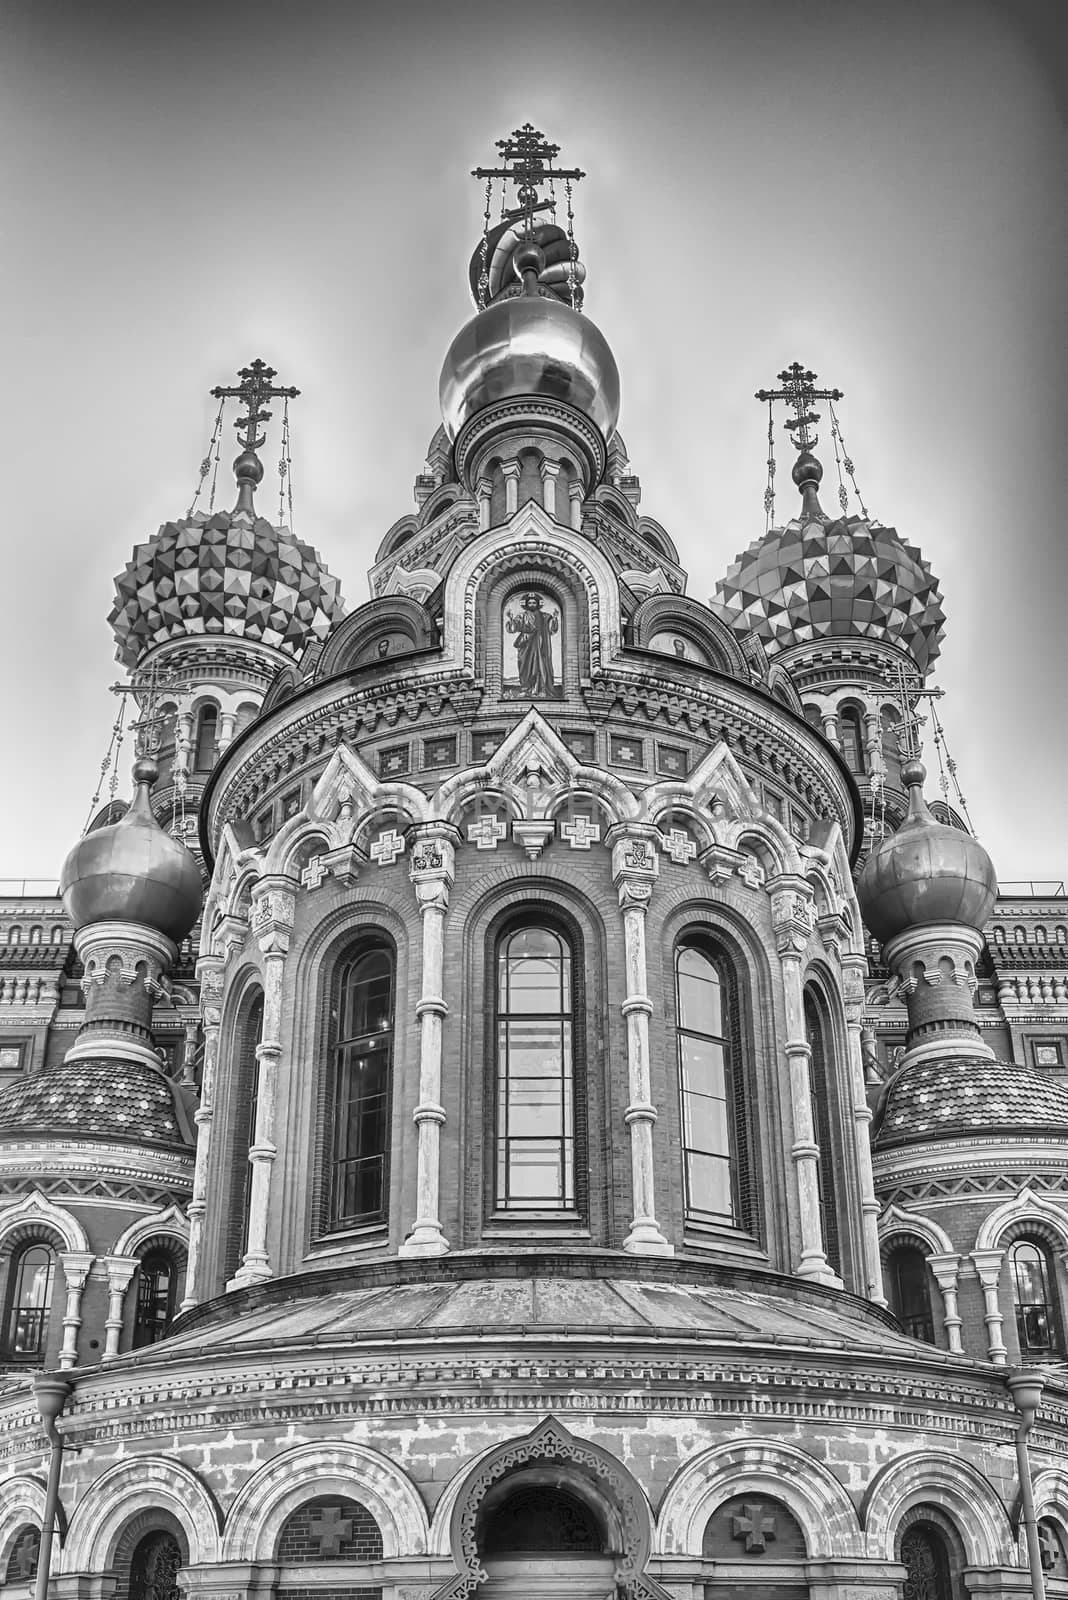 Church of the Savior on Spilled Blood, St. Petersburg, Russia by marcorubino